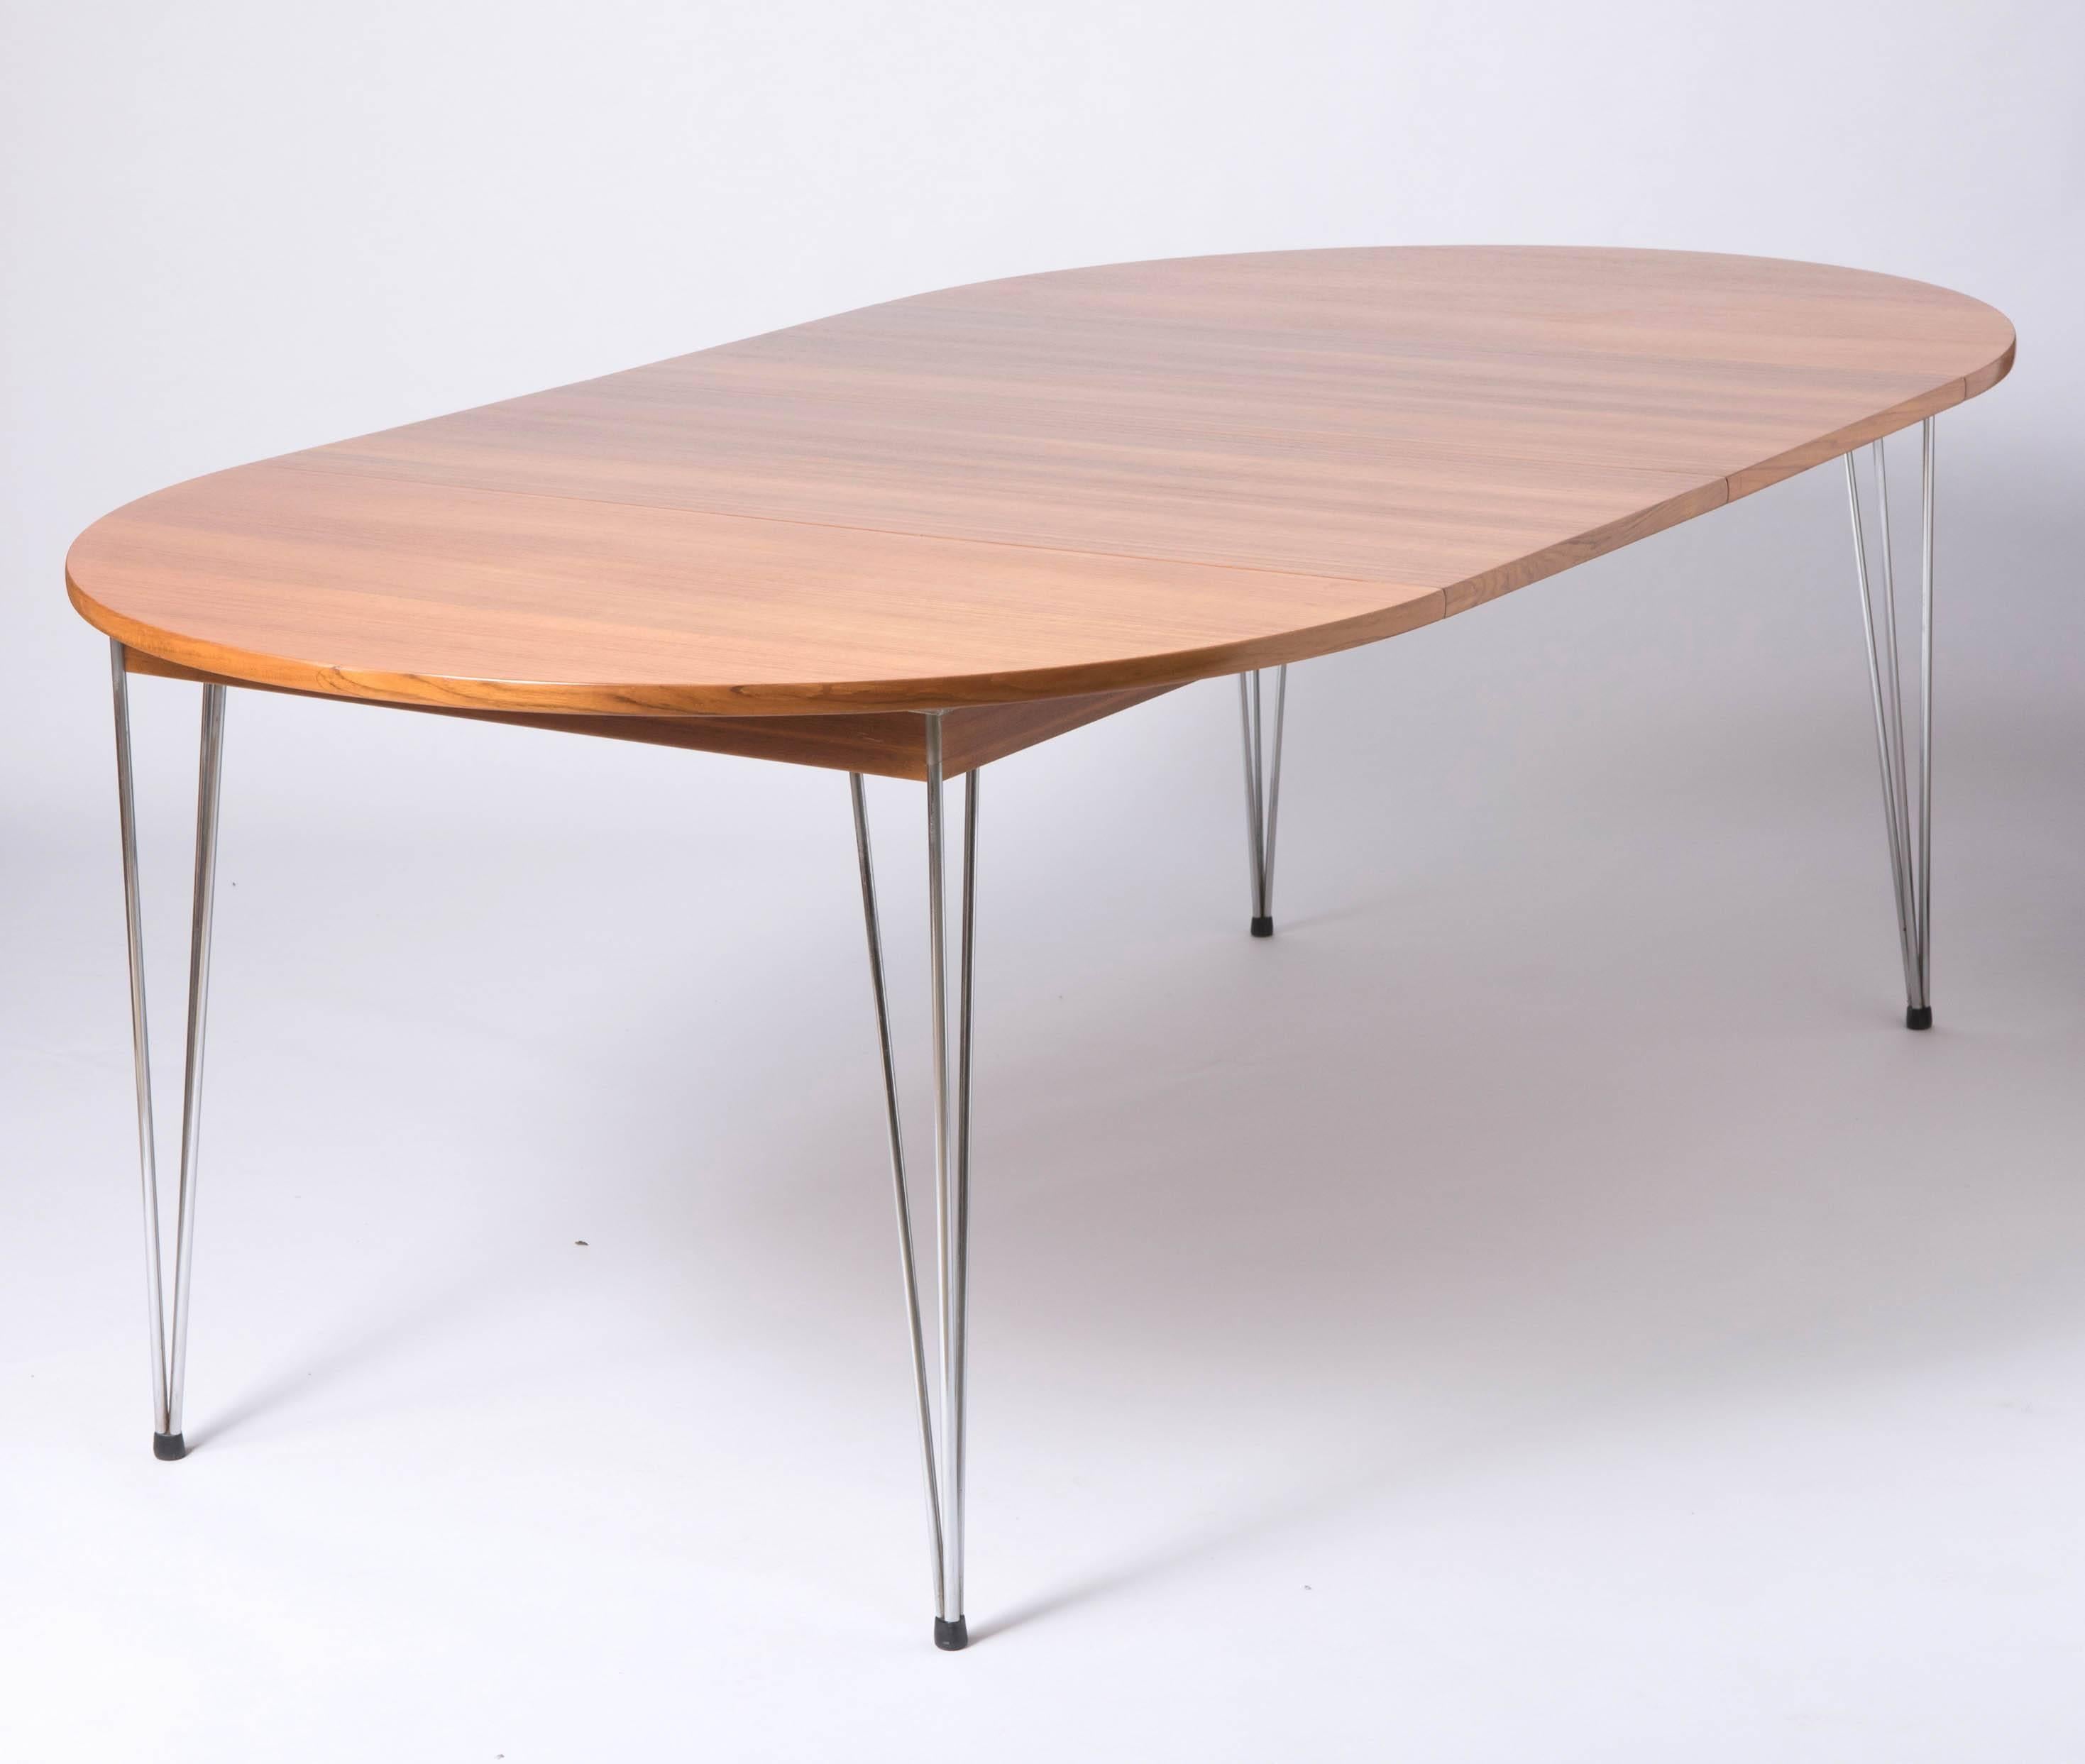 A Scandinavian Teak dining table By Hans Brattrud.
The extending top with a hidden two part leaf. Upon a chromium plated base.
Ebonized stretcher.
Unmarked.
Norwegian, 
circa 1950
Measures: 73 cm high x 137 cm wide (198 cm extended) x 92 cm deep.
  